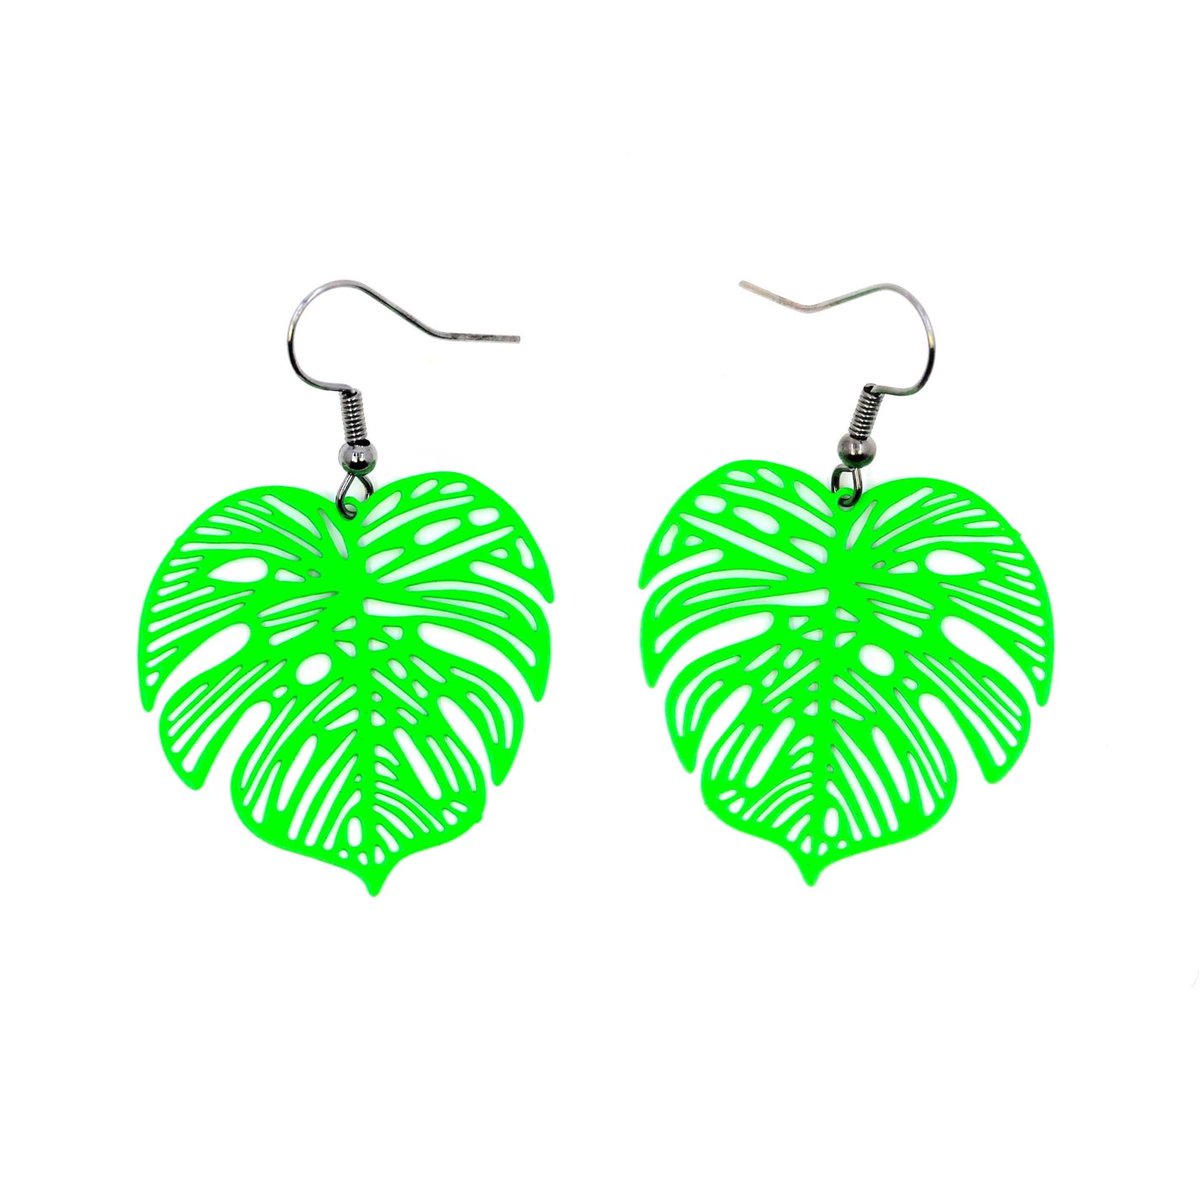 RESTOCKED Neon green monstera leaves earrings  #etsy #beachtropical #bohohippie etsy.me/3H7idqY